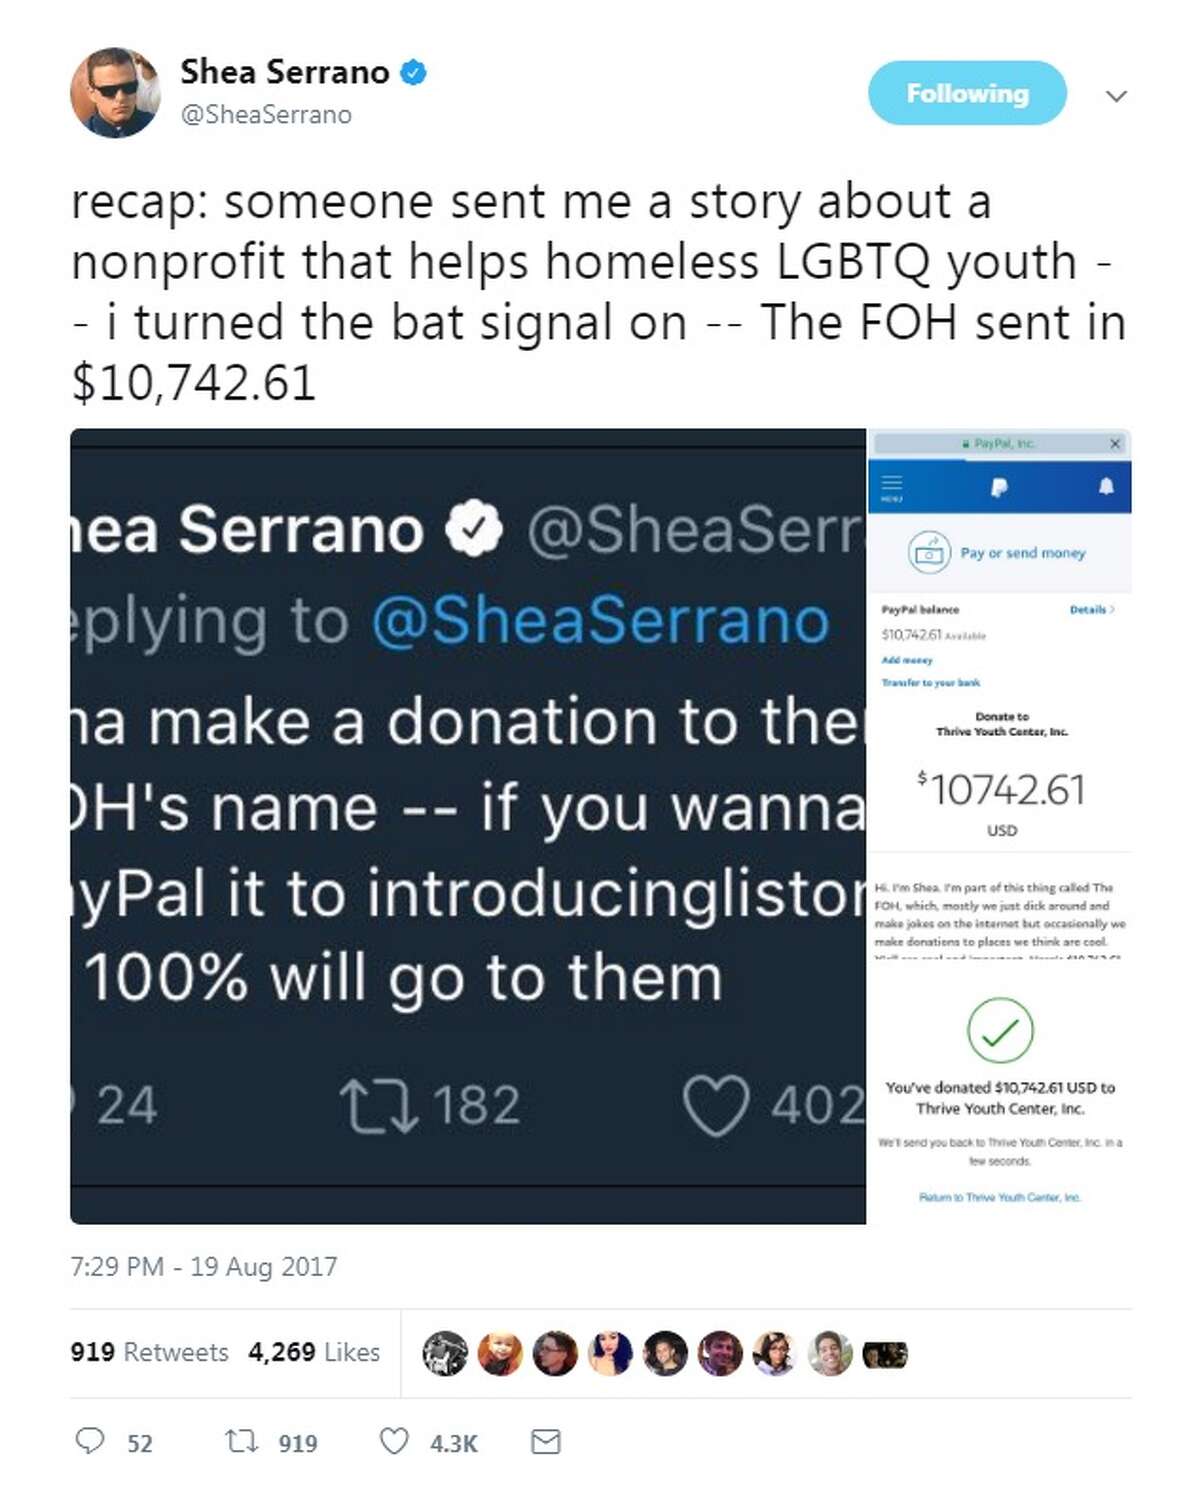 @SheaSerrano: "recap: someone sent me a story about a nonprofit that helps homeless LGBTQ youth -- i turned the bat signal on -- The FOH sent in $10,742.61"